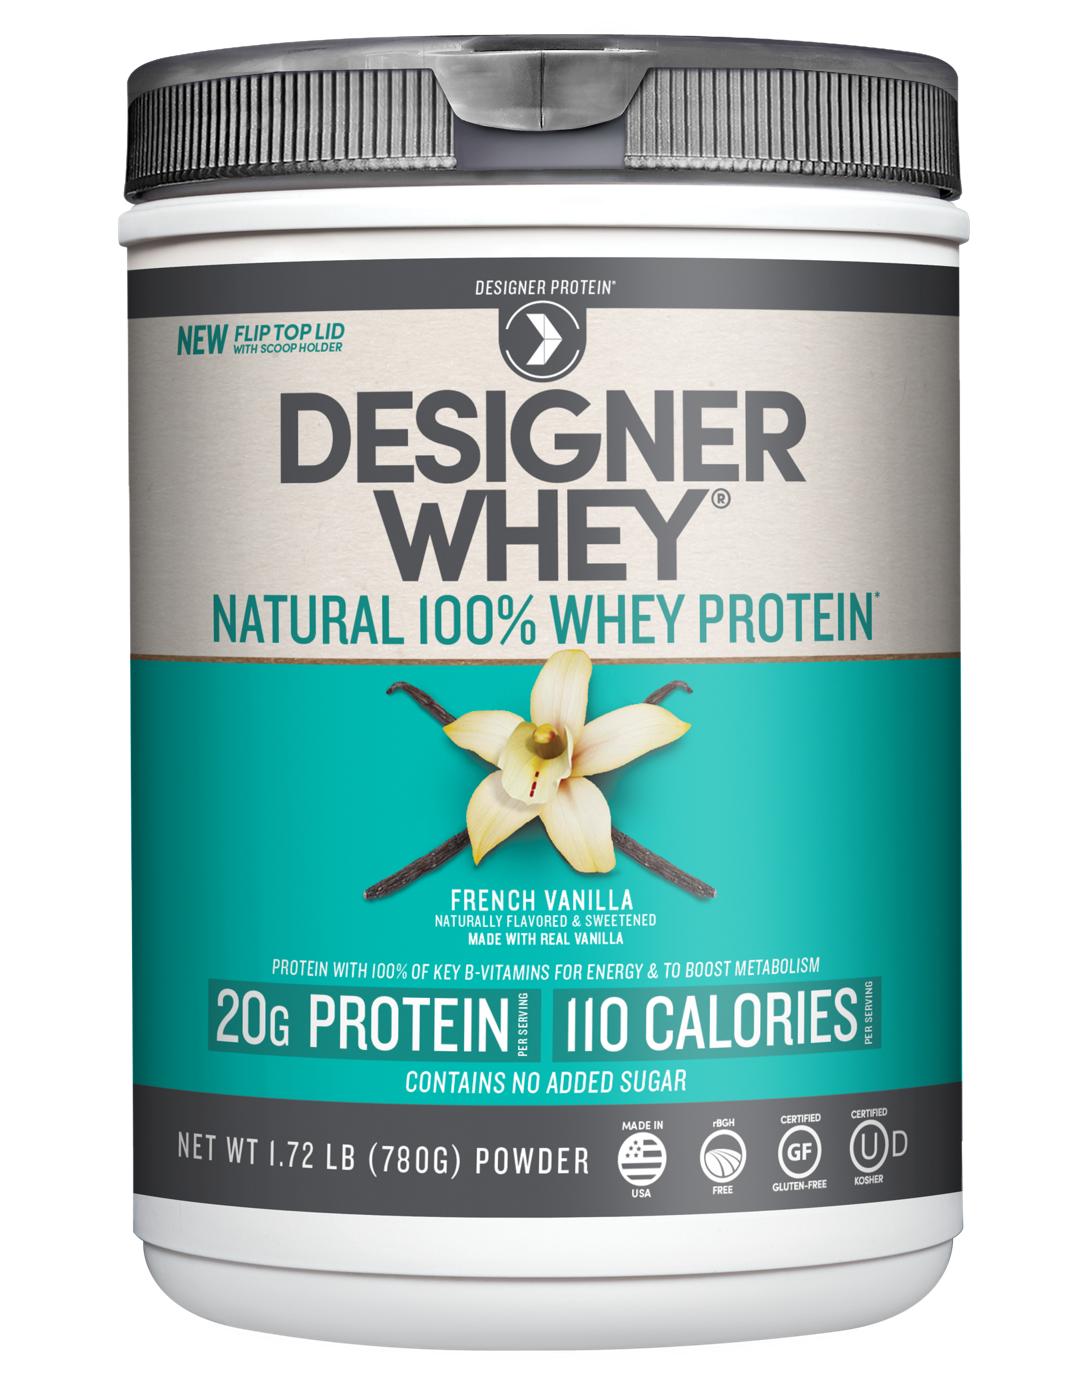 Designer Whey Natural 100% Whey Protein - French Vanilla; image 1 of 2